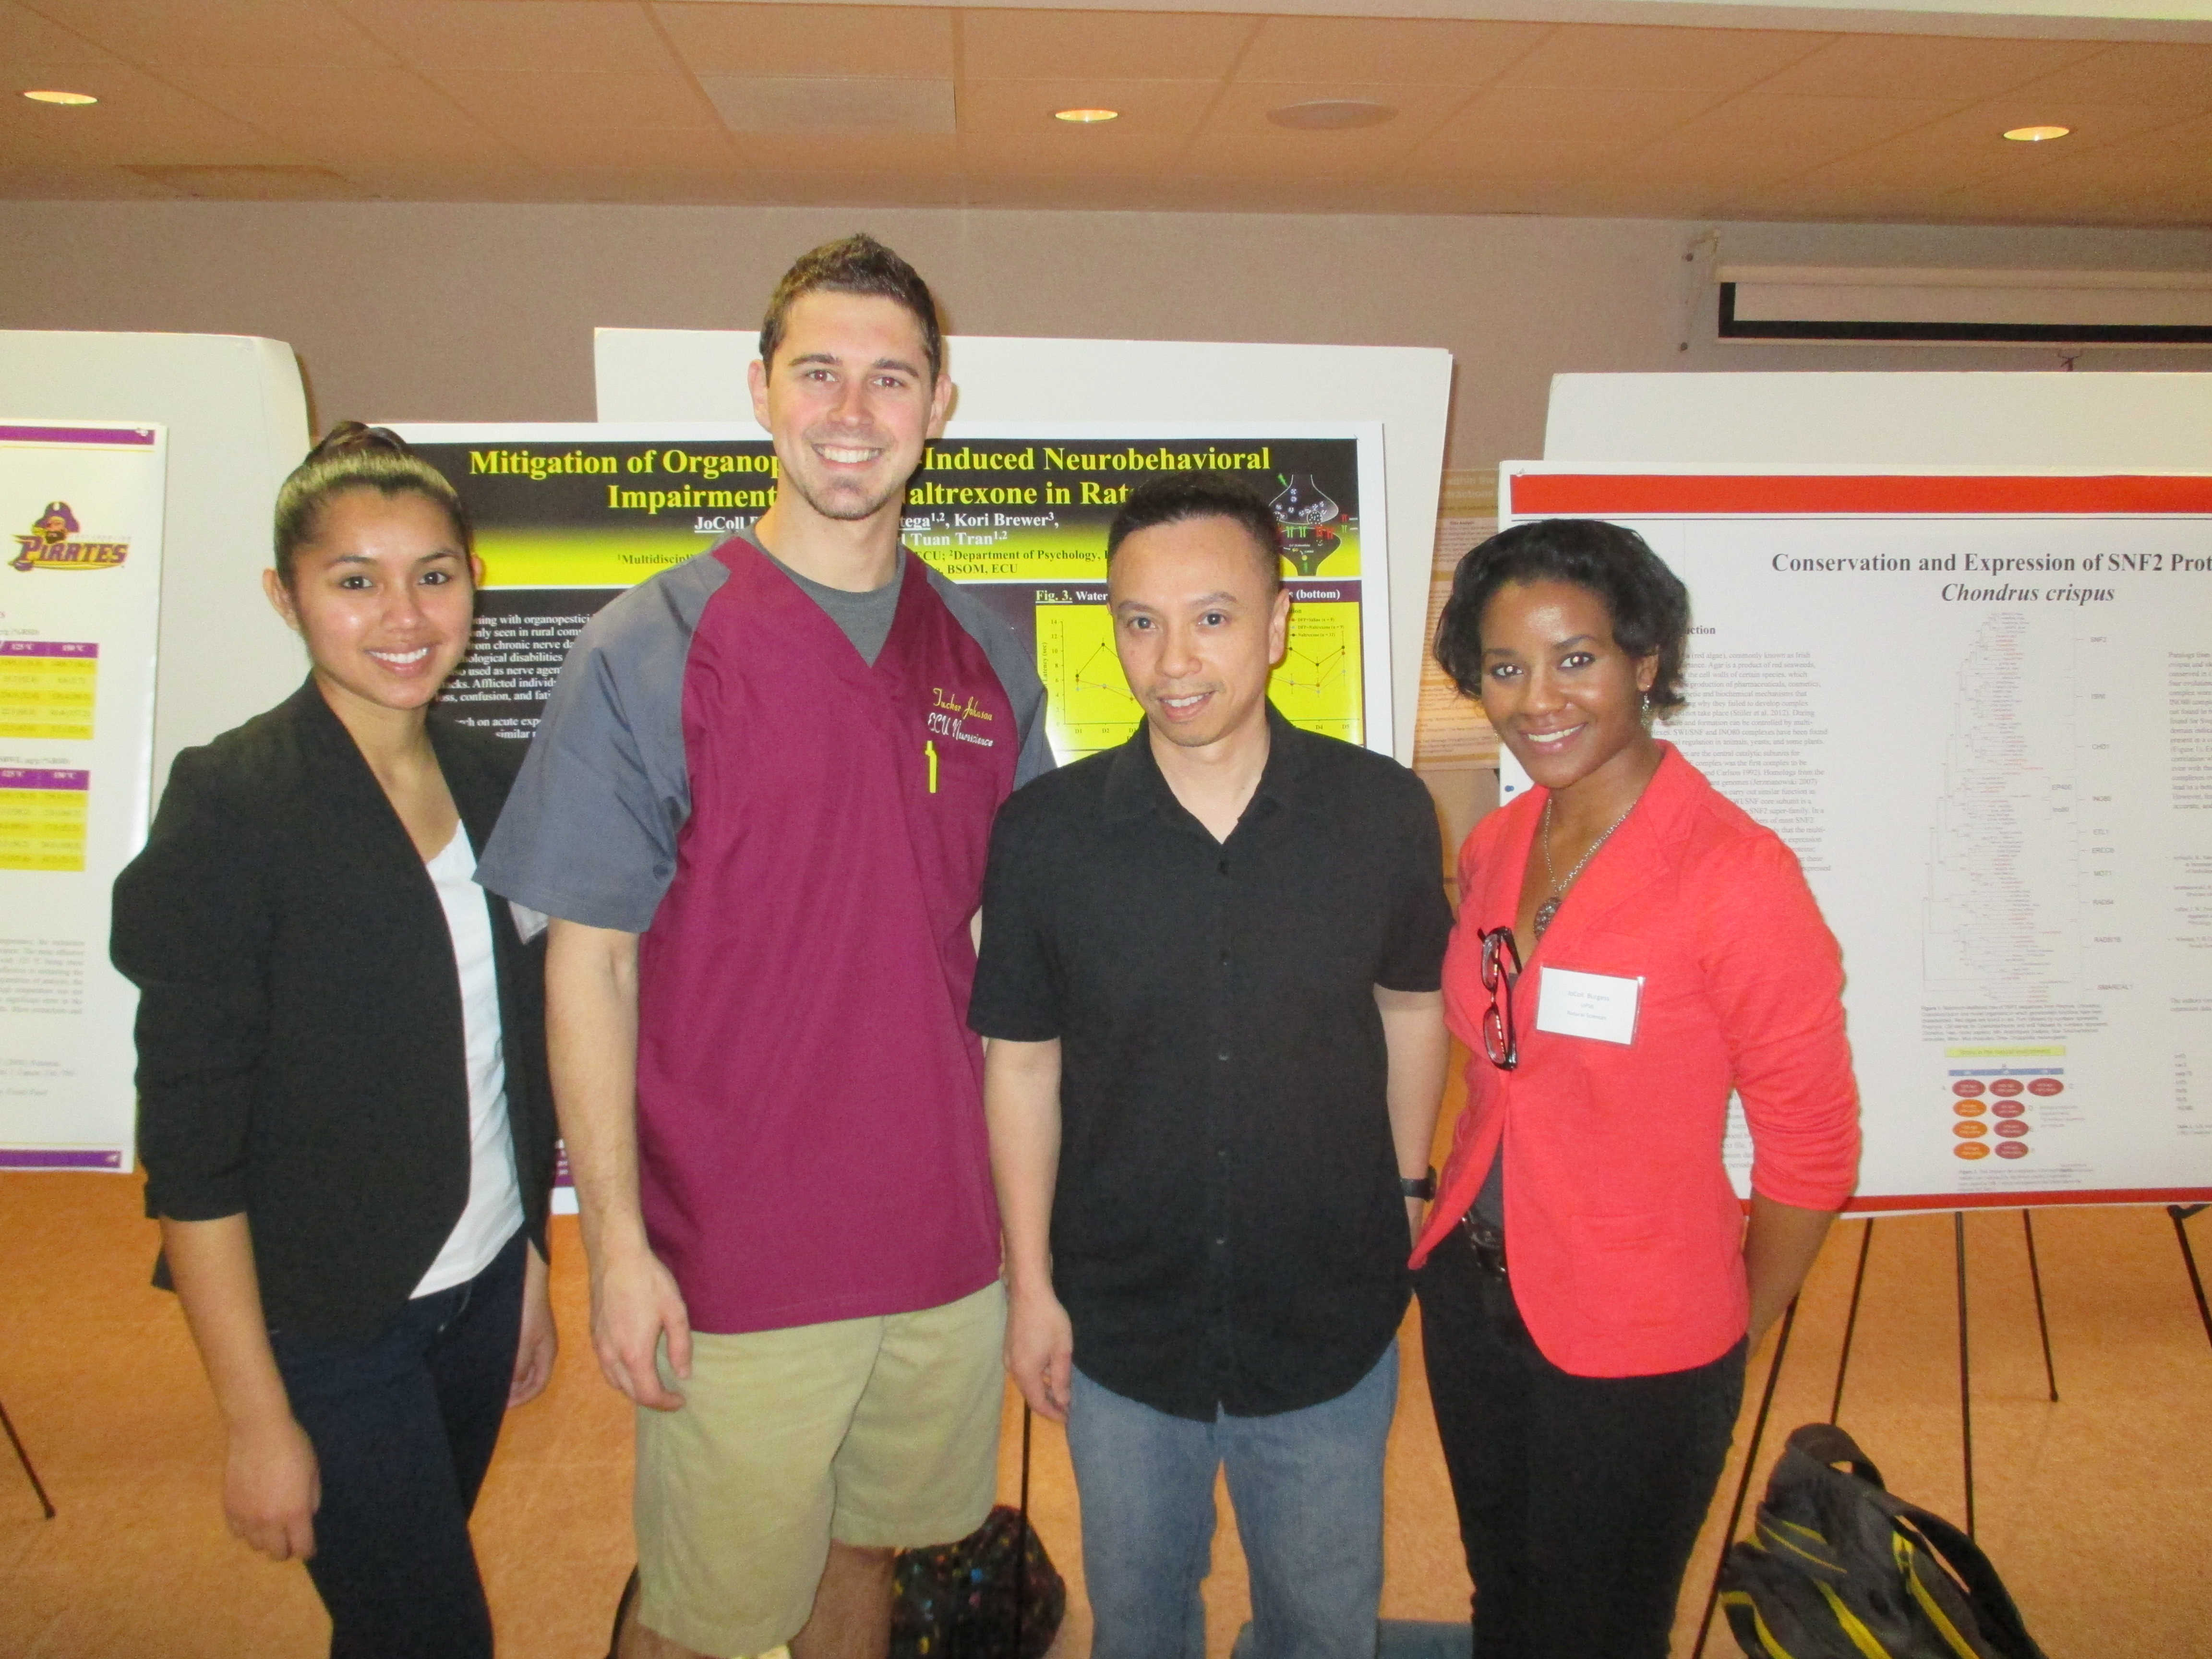 Lidia, Tucker, Dr. T, and JoColl having a nice pose at RCAW 2014